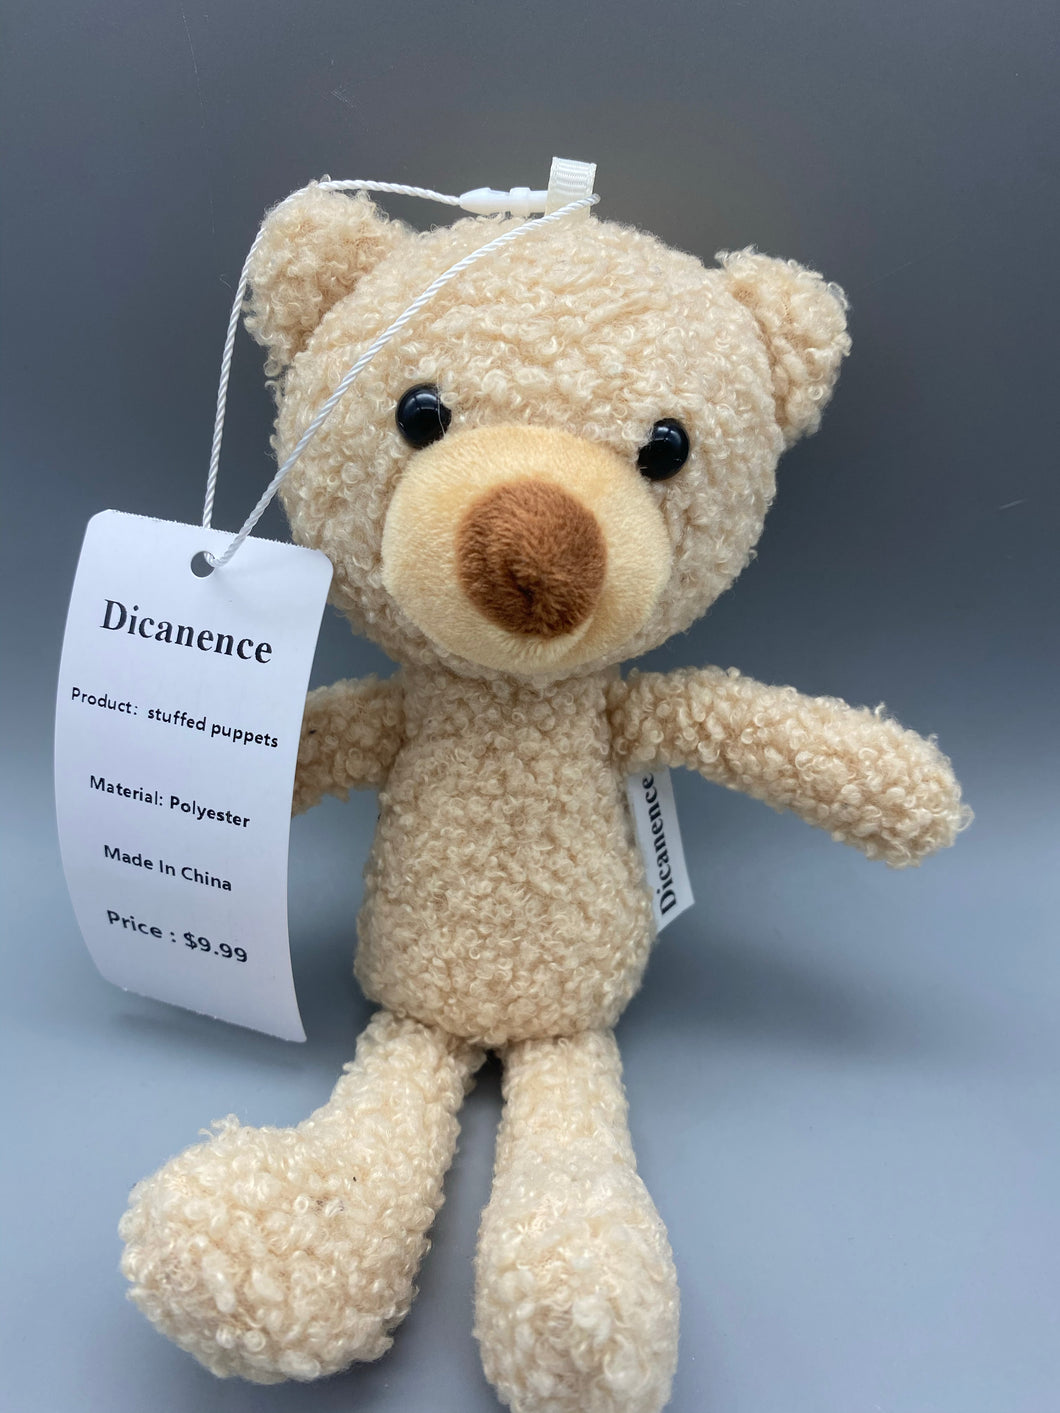 Dicanence stuffed puppets,Mini Teddy Bear Pet Toy,Soft Miniature Bear Plush, Bear Doll with Brooch for Birthday/ Xmas Decorations,Cute Pet Plush Toys Stuffed Puppy Chew Toys for Small Medium Dog Puppy Pets - Dog Toys